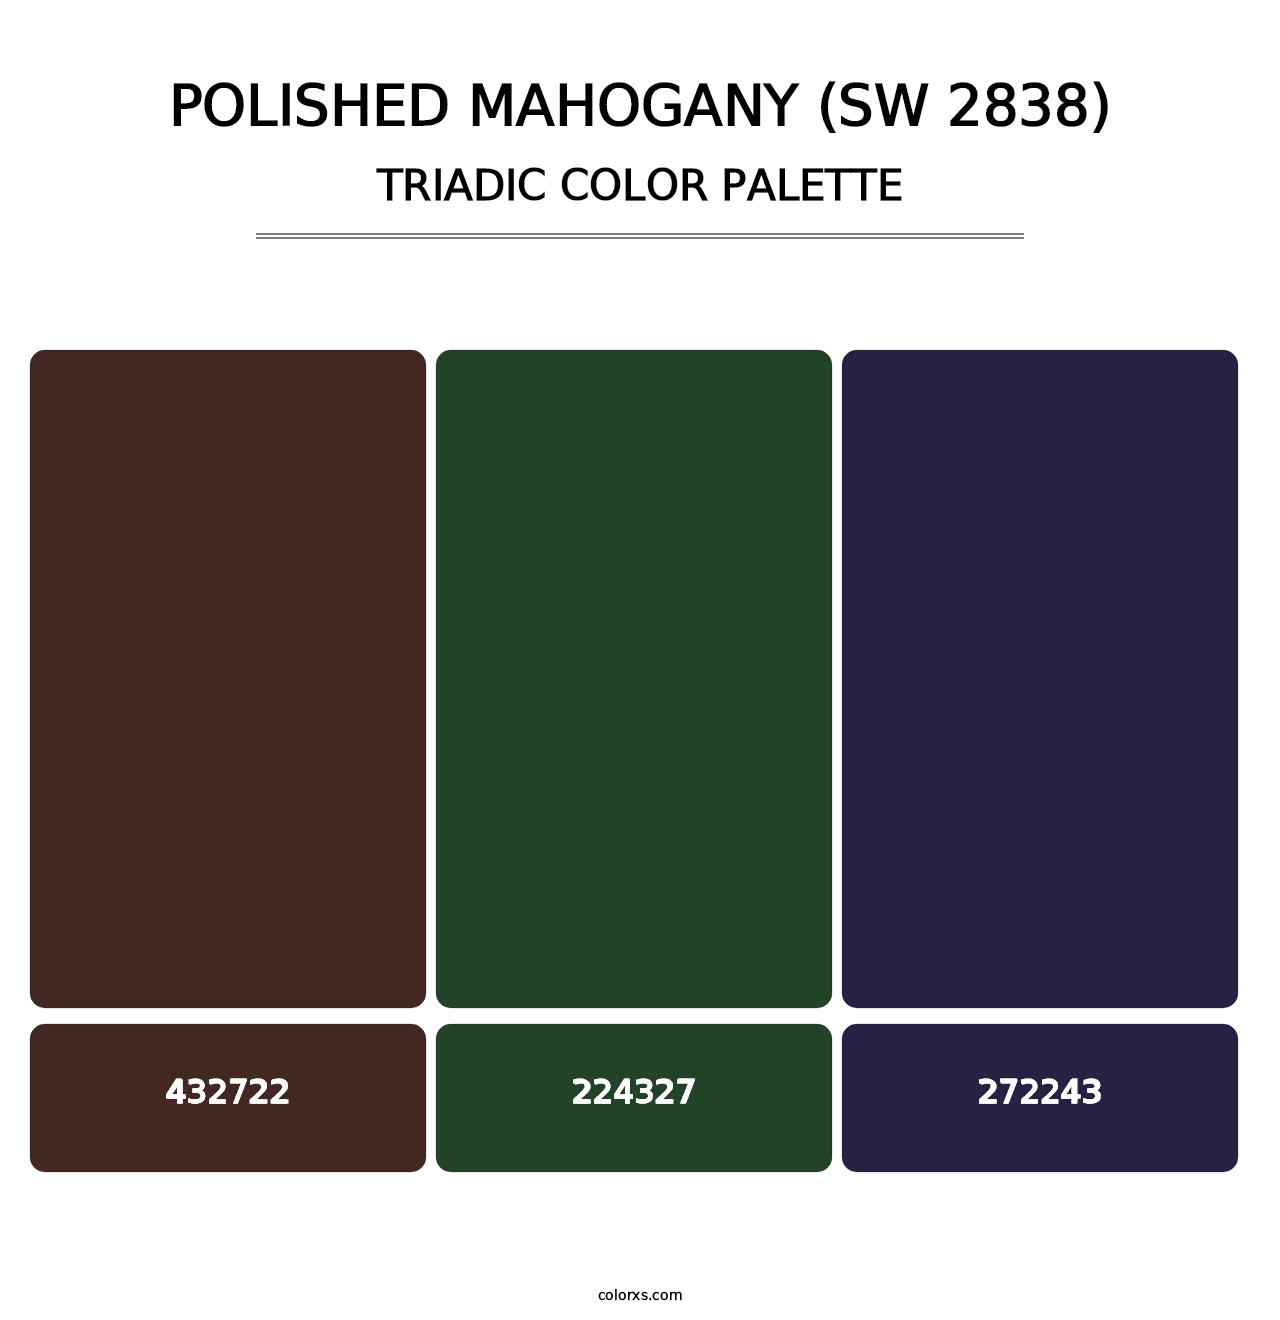 Polished Mahogany (SW 2838) - Triadic Color Palette